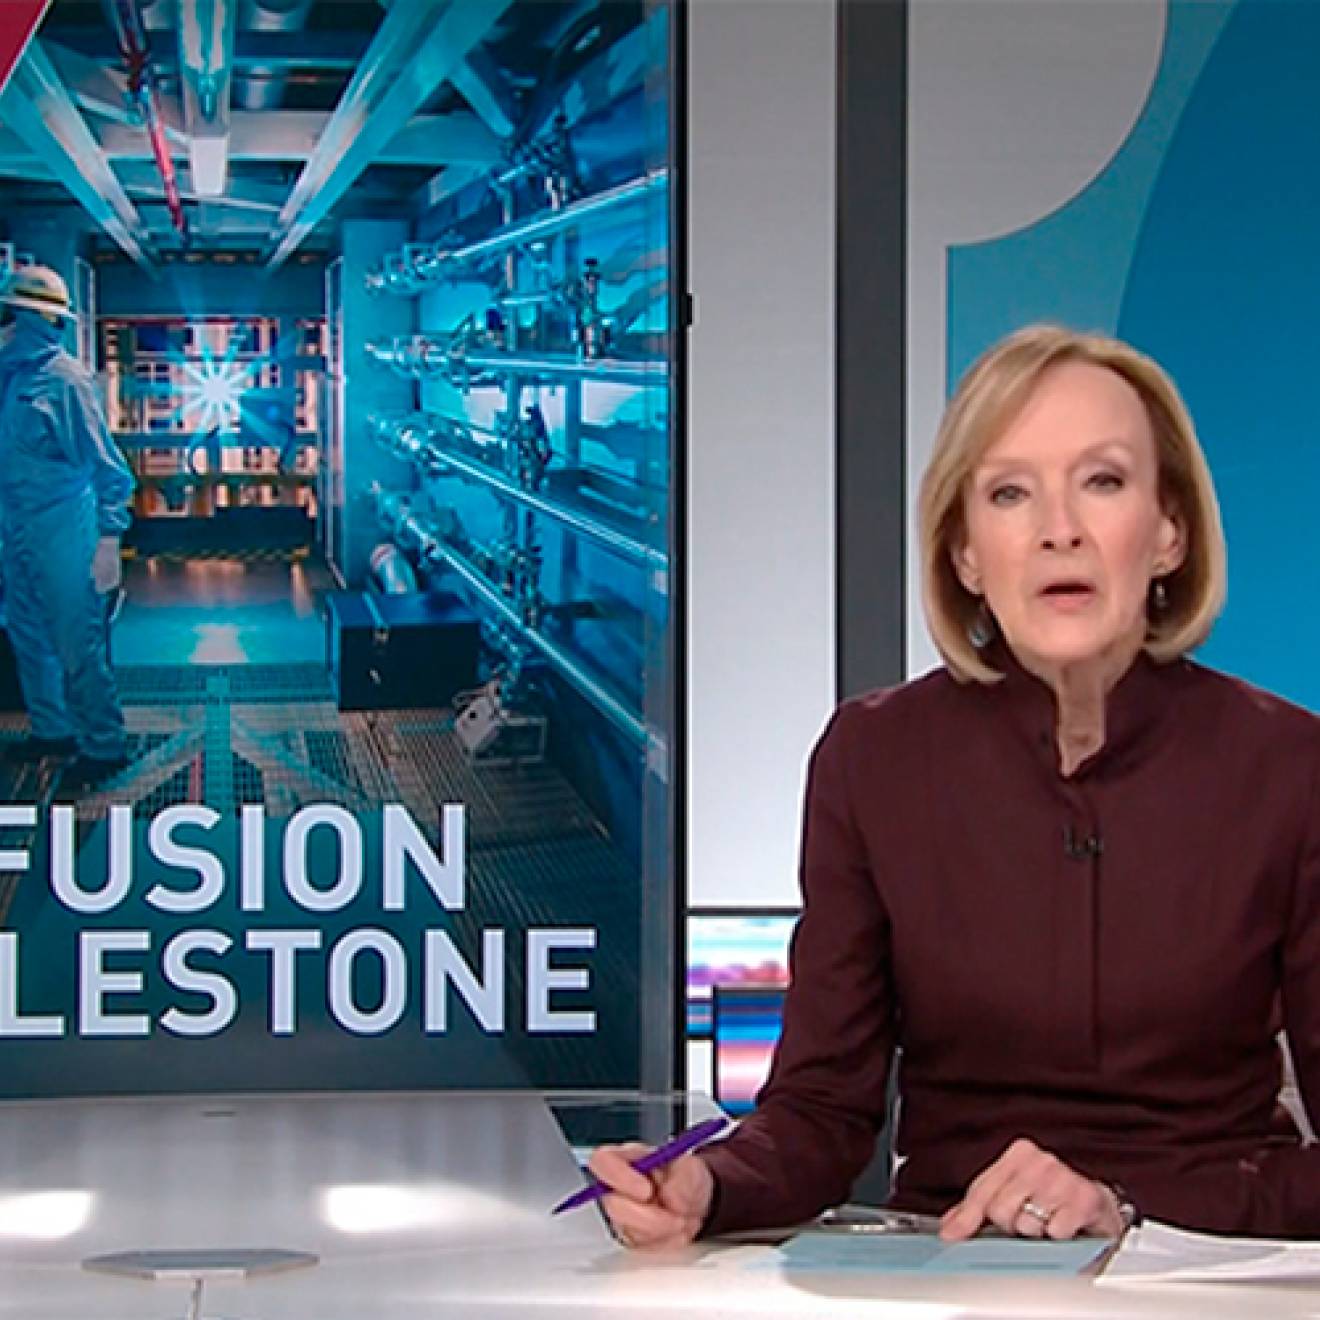 Anchor Judy Woodruff at the desk, with a graphic about fusion ignition on the side